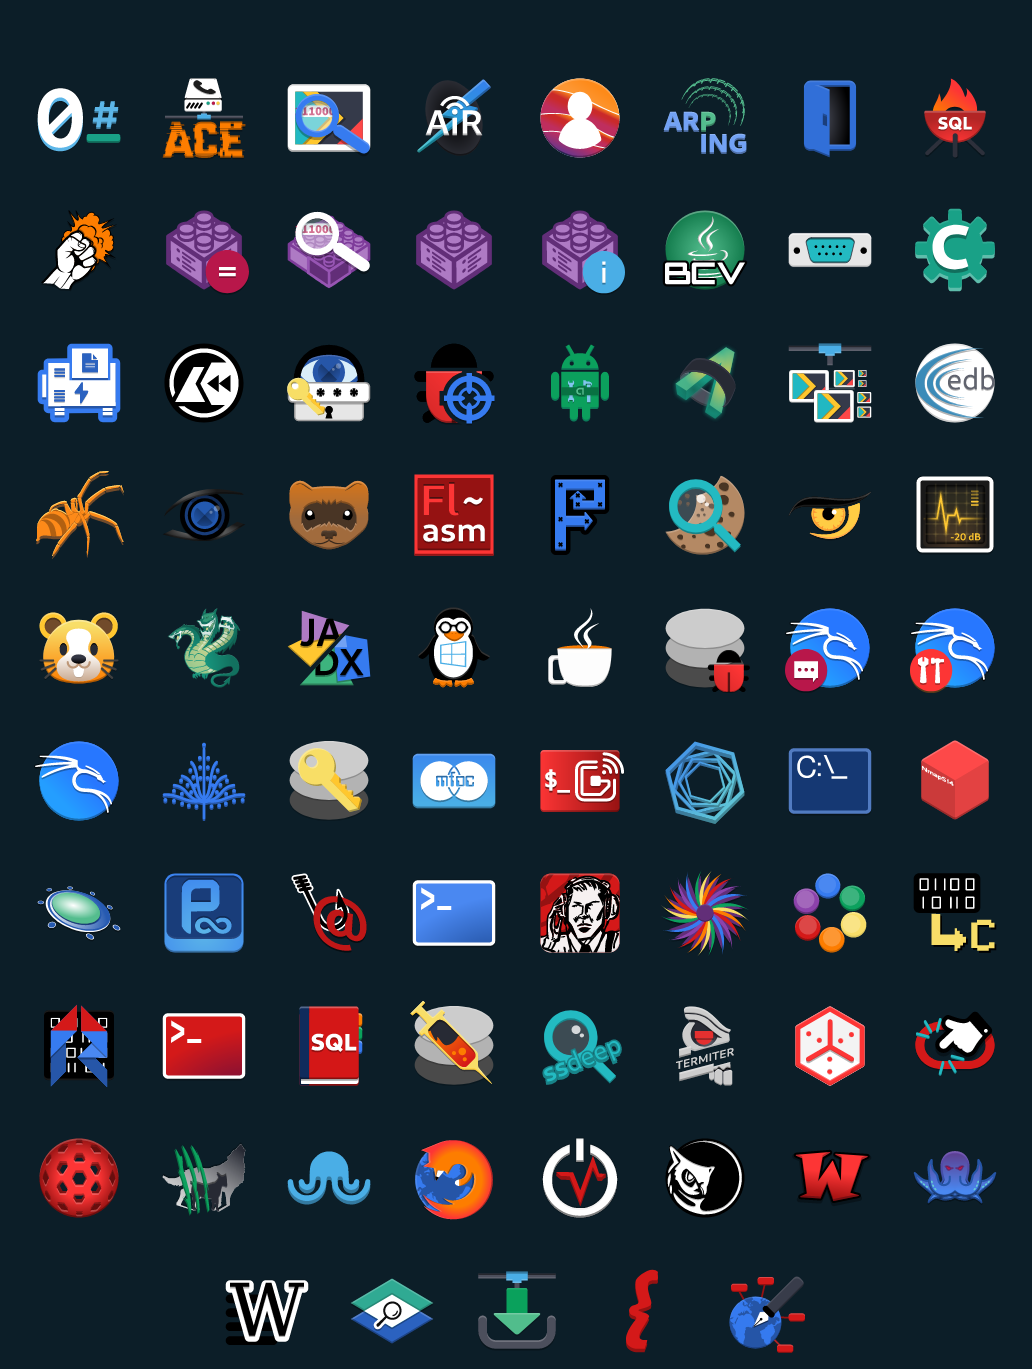 release-2020.2-icons.png